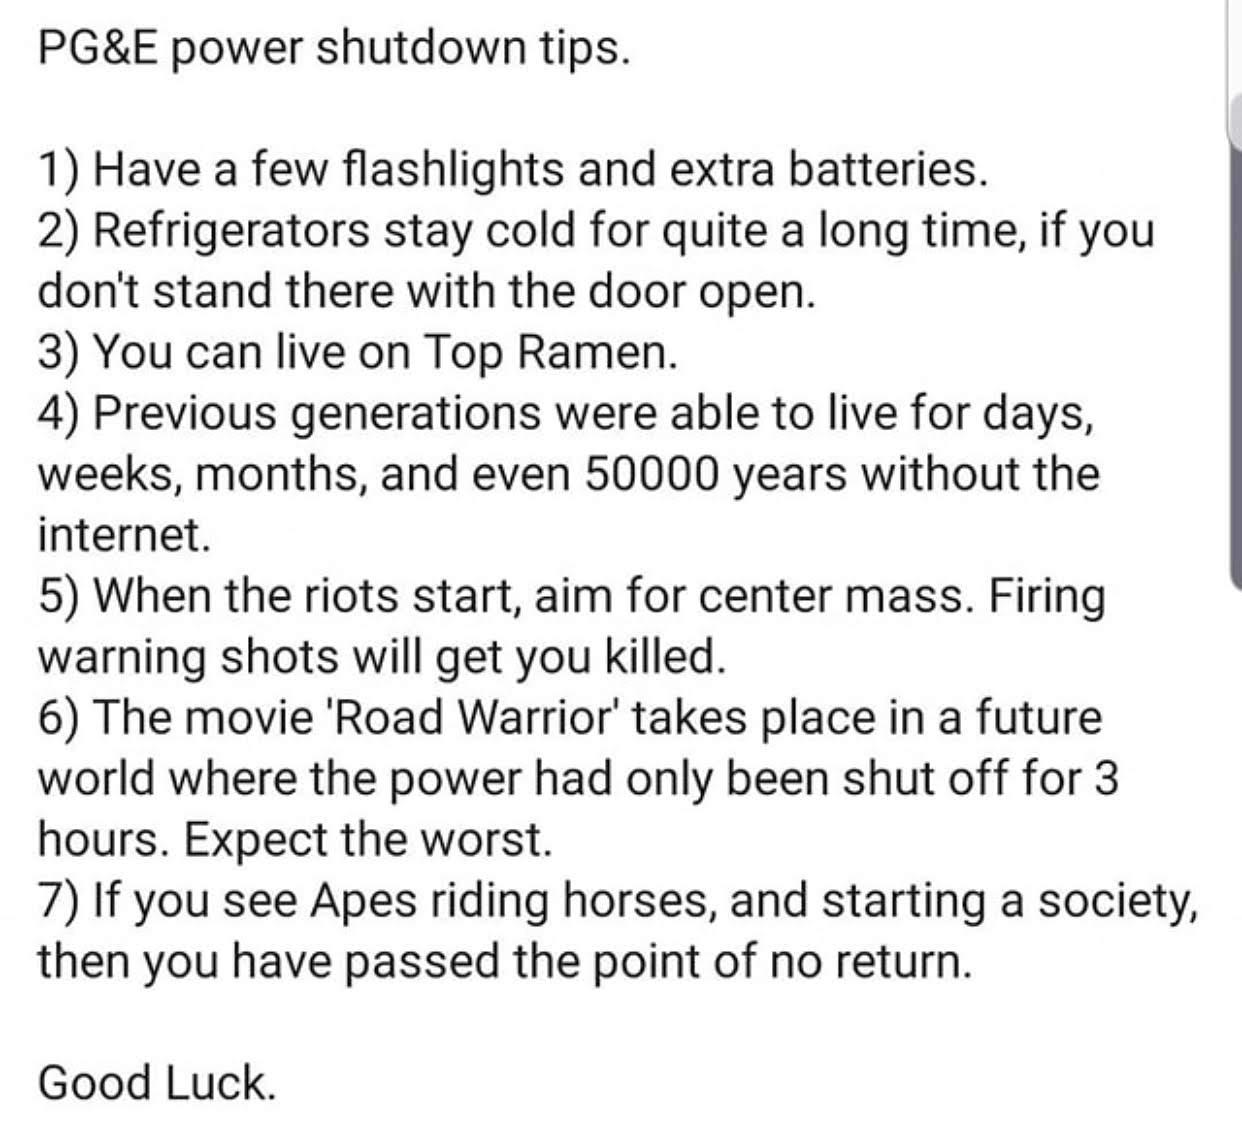 letter to editor on save water - Pg&E power shutdown tips. 1 Have a few flashlights and extra batteries. 2 Refrigerators stay cold for quite a long time, if you don't stand there with the door open. 3 You can live on Top Ramen. 4 Previous generations were